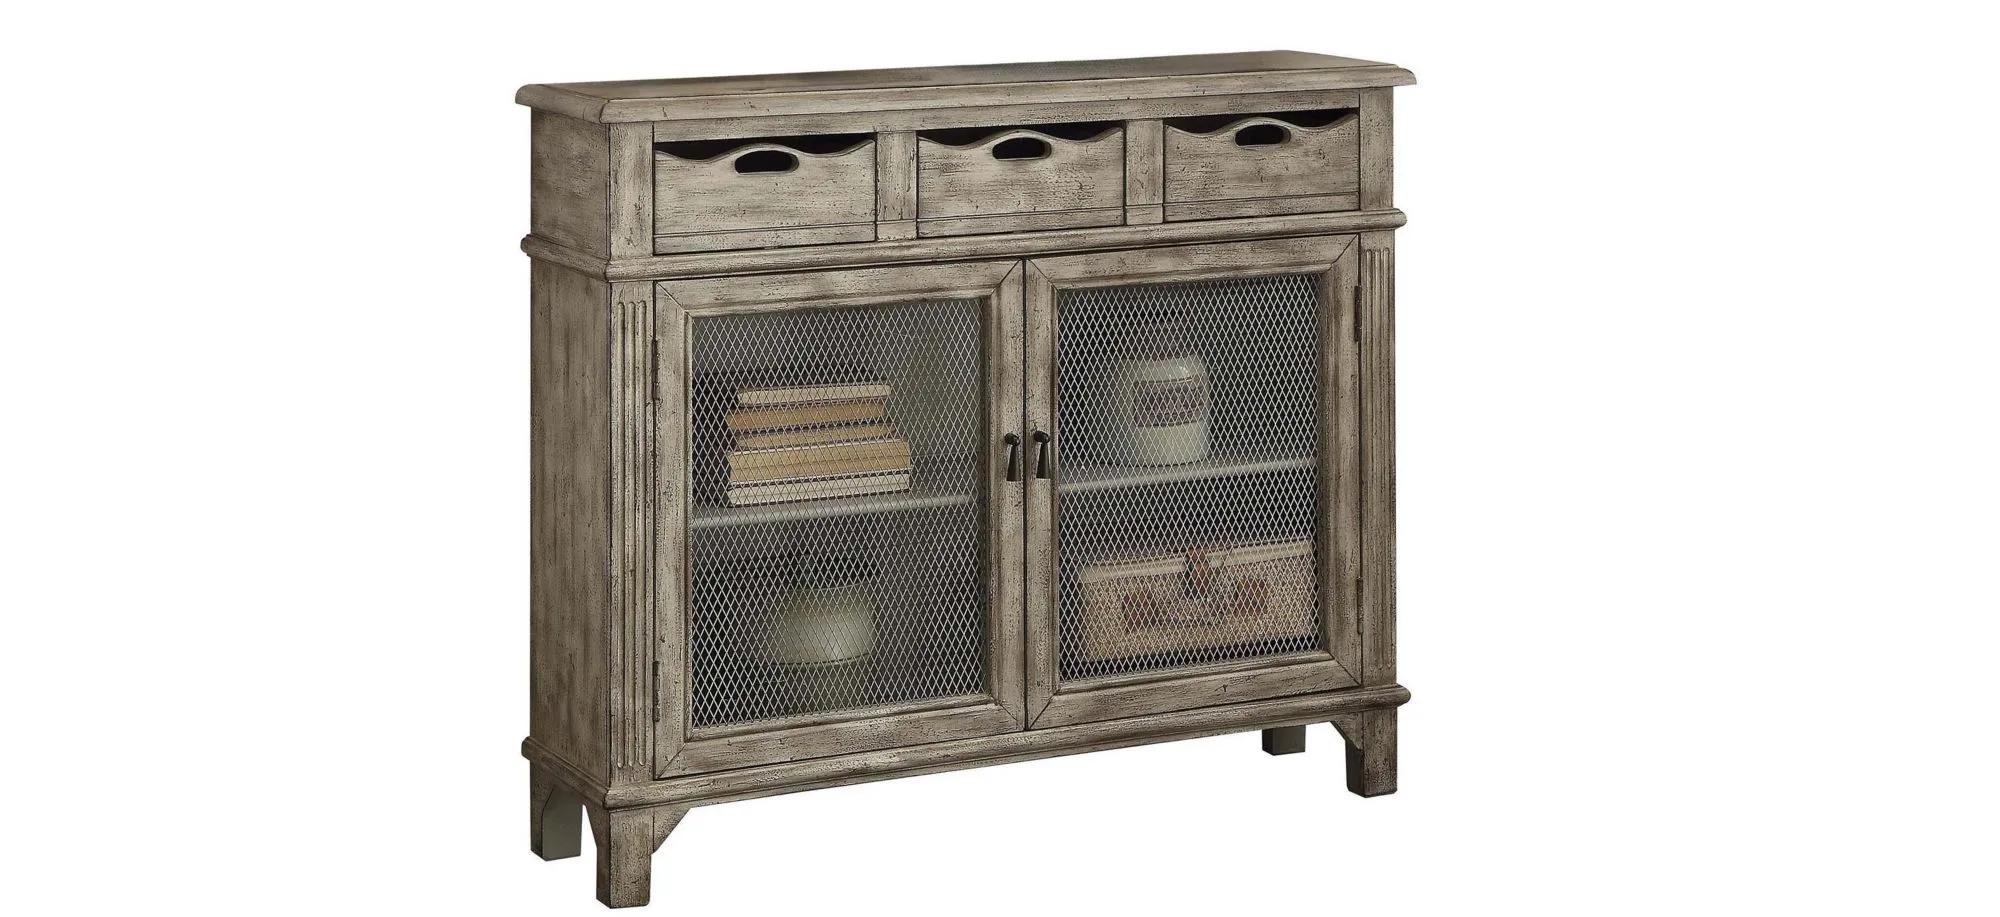 Vernon Console Cabinet in Weathered Gray by Acme Furniture Industry